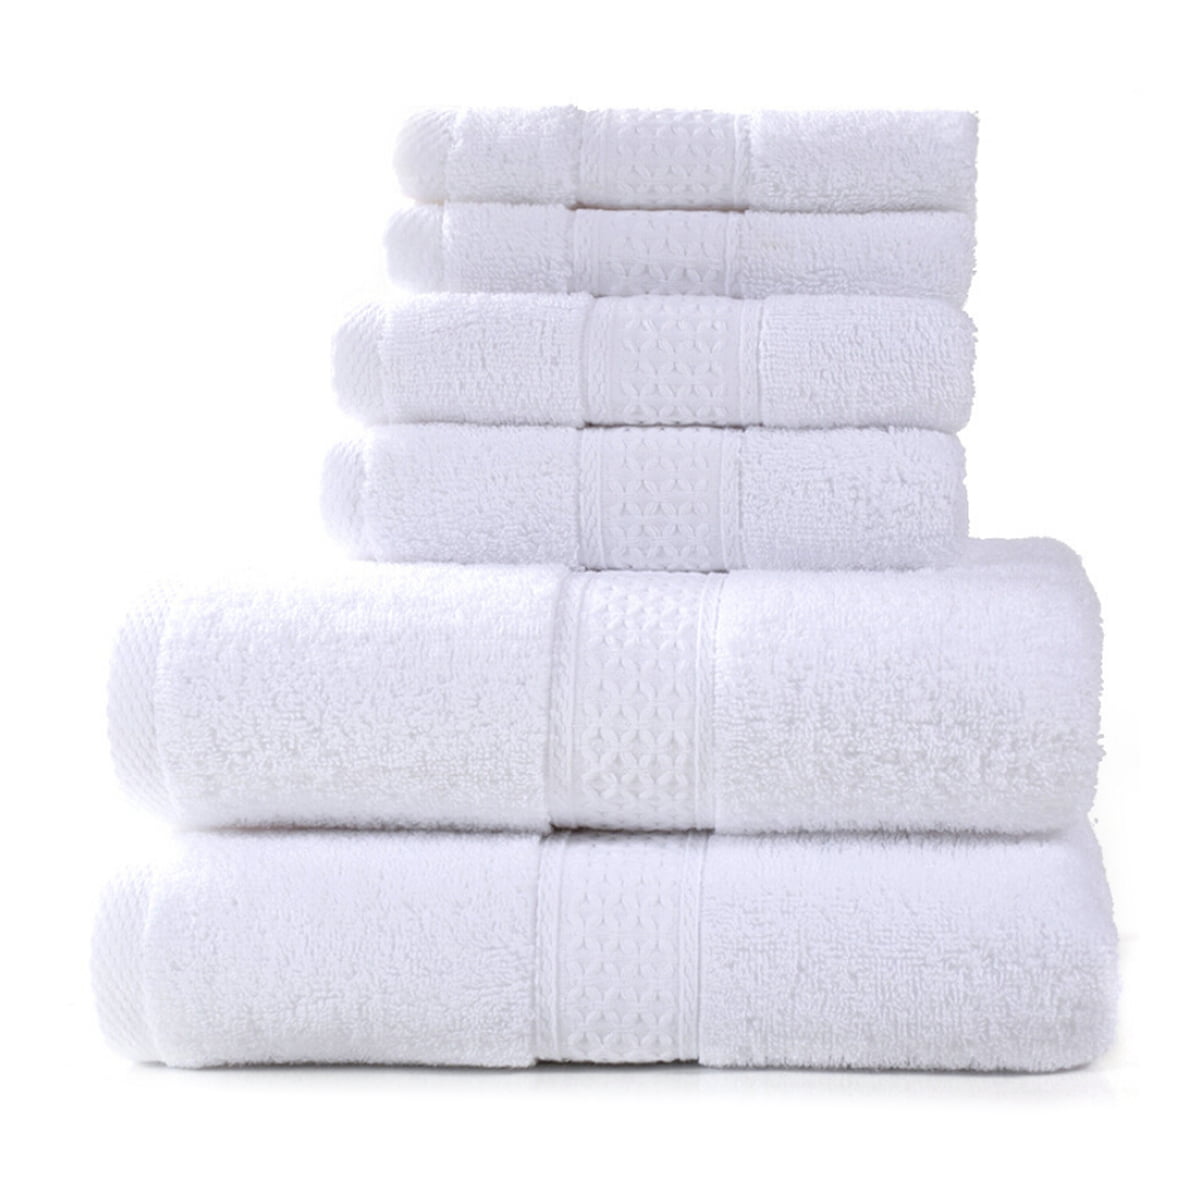 COUTEXYI Thick Bath Towel Set Bathroom Cotton Soft Absorbent Towels Adult  Unseix Towel 